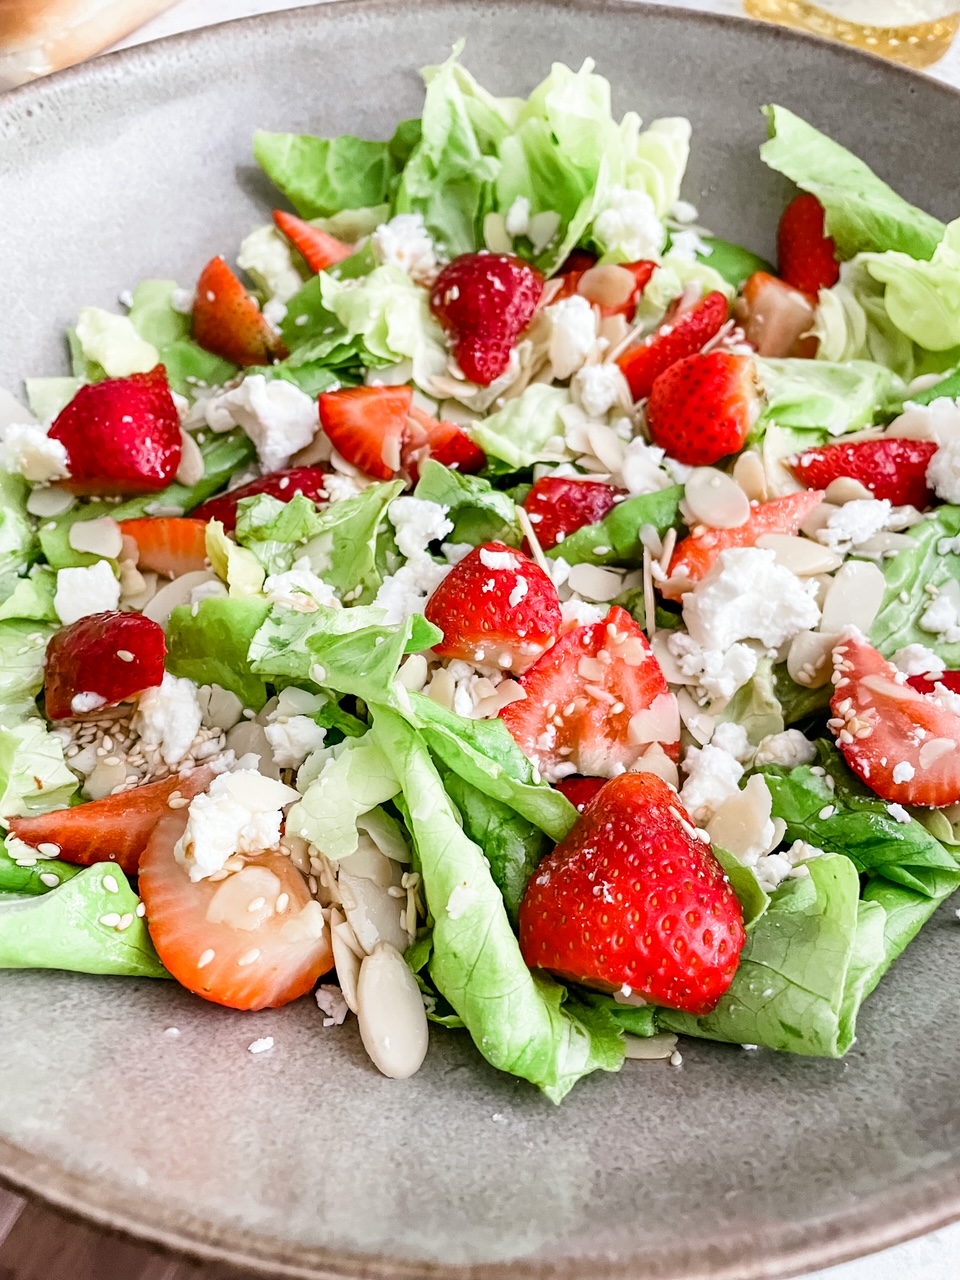 The finished Strawberry and Chevre Salad with Sesame Vinaigrette